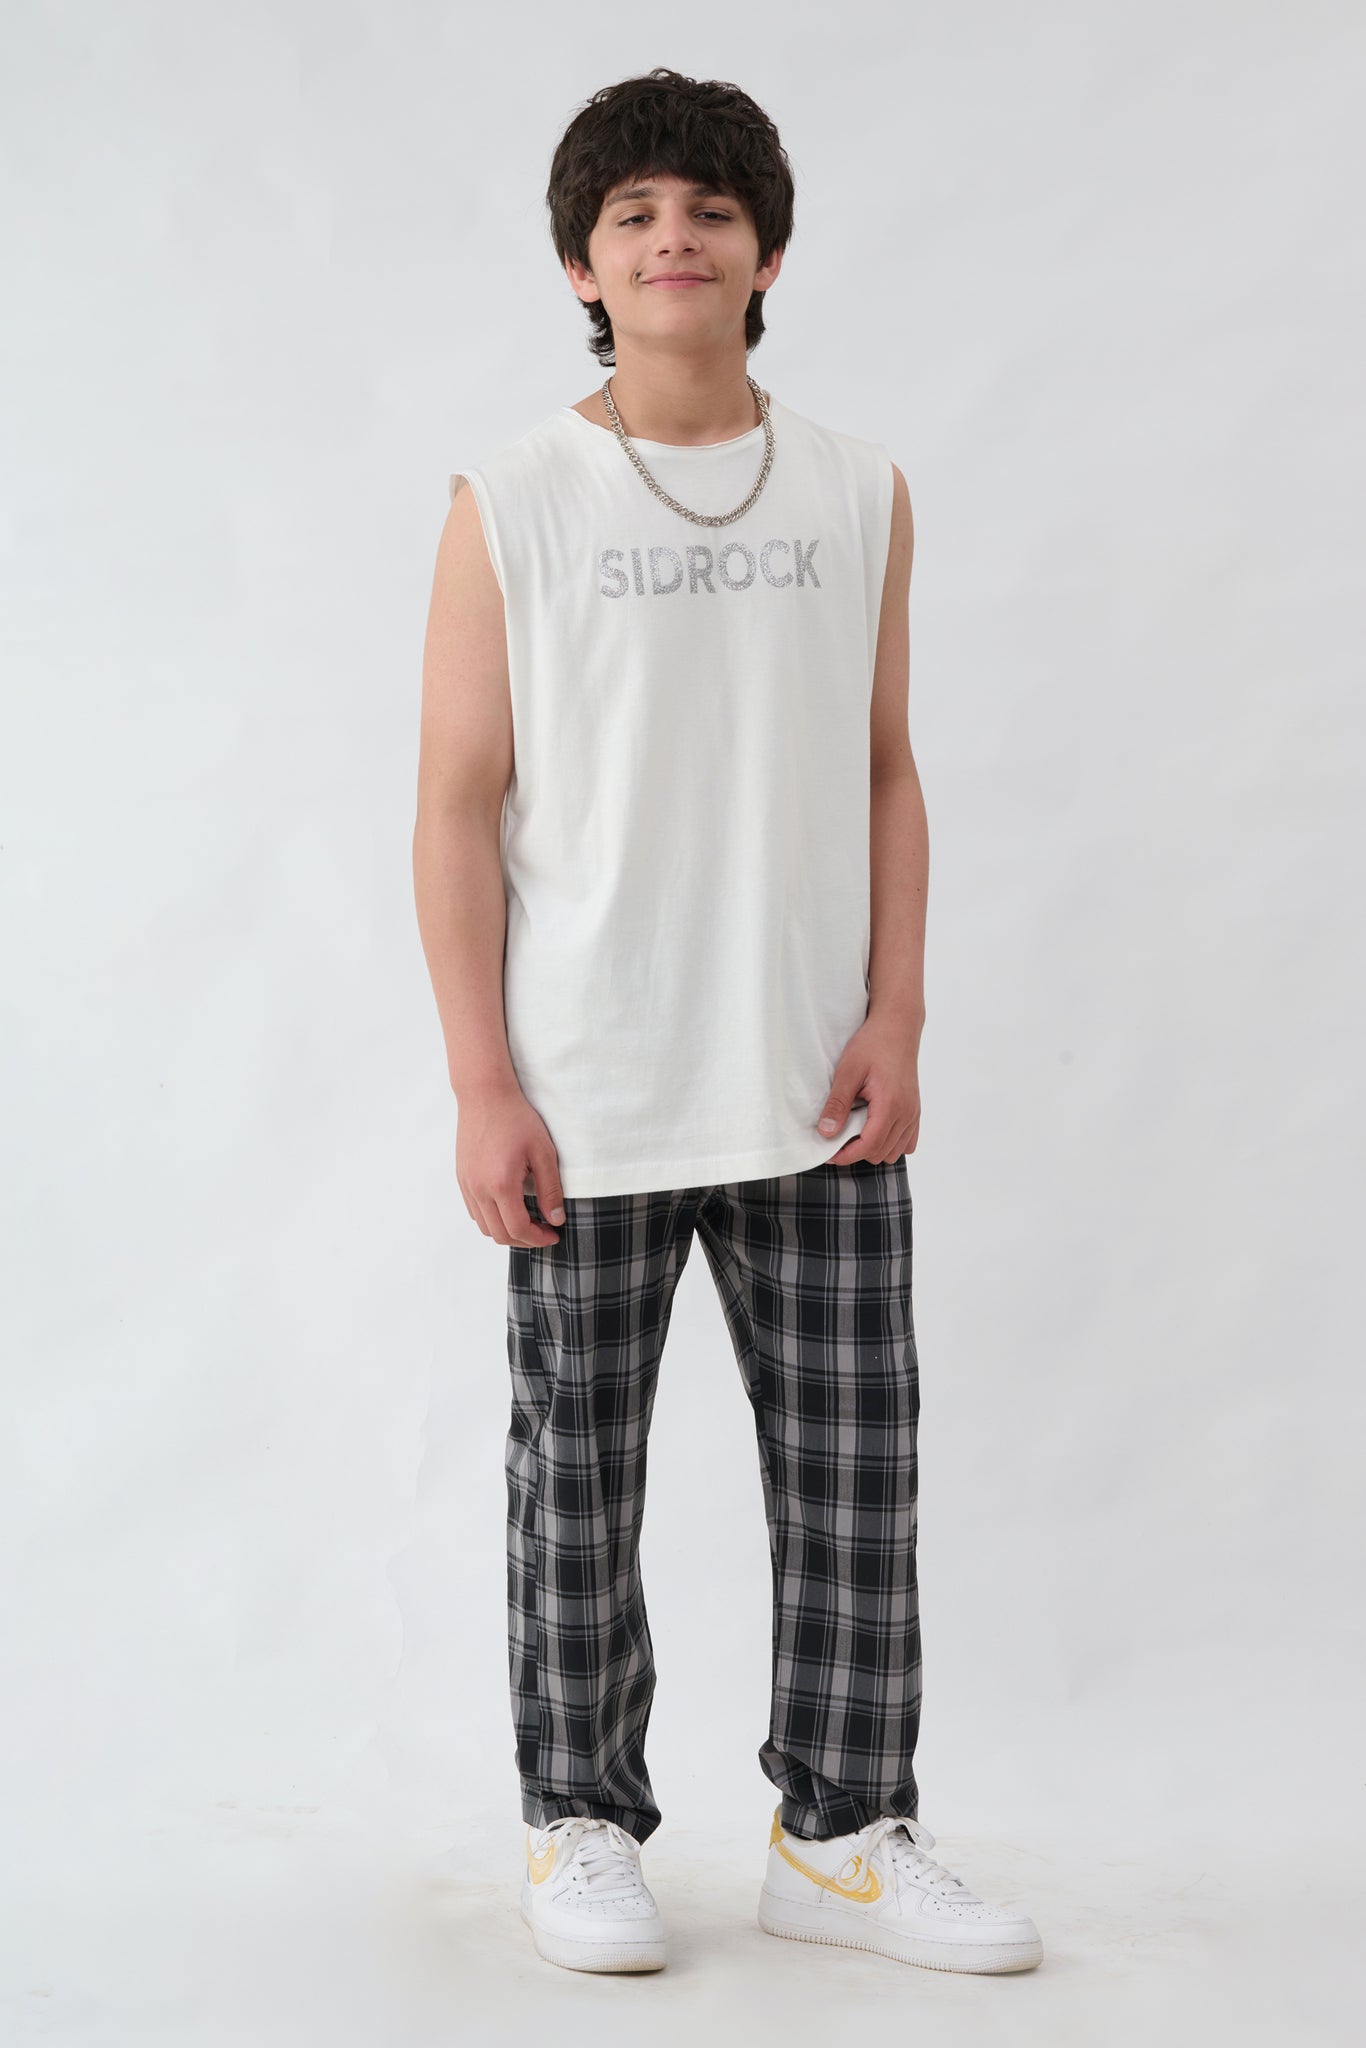 Black And Grey Check Trouser With White Sando Combo